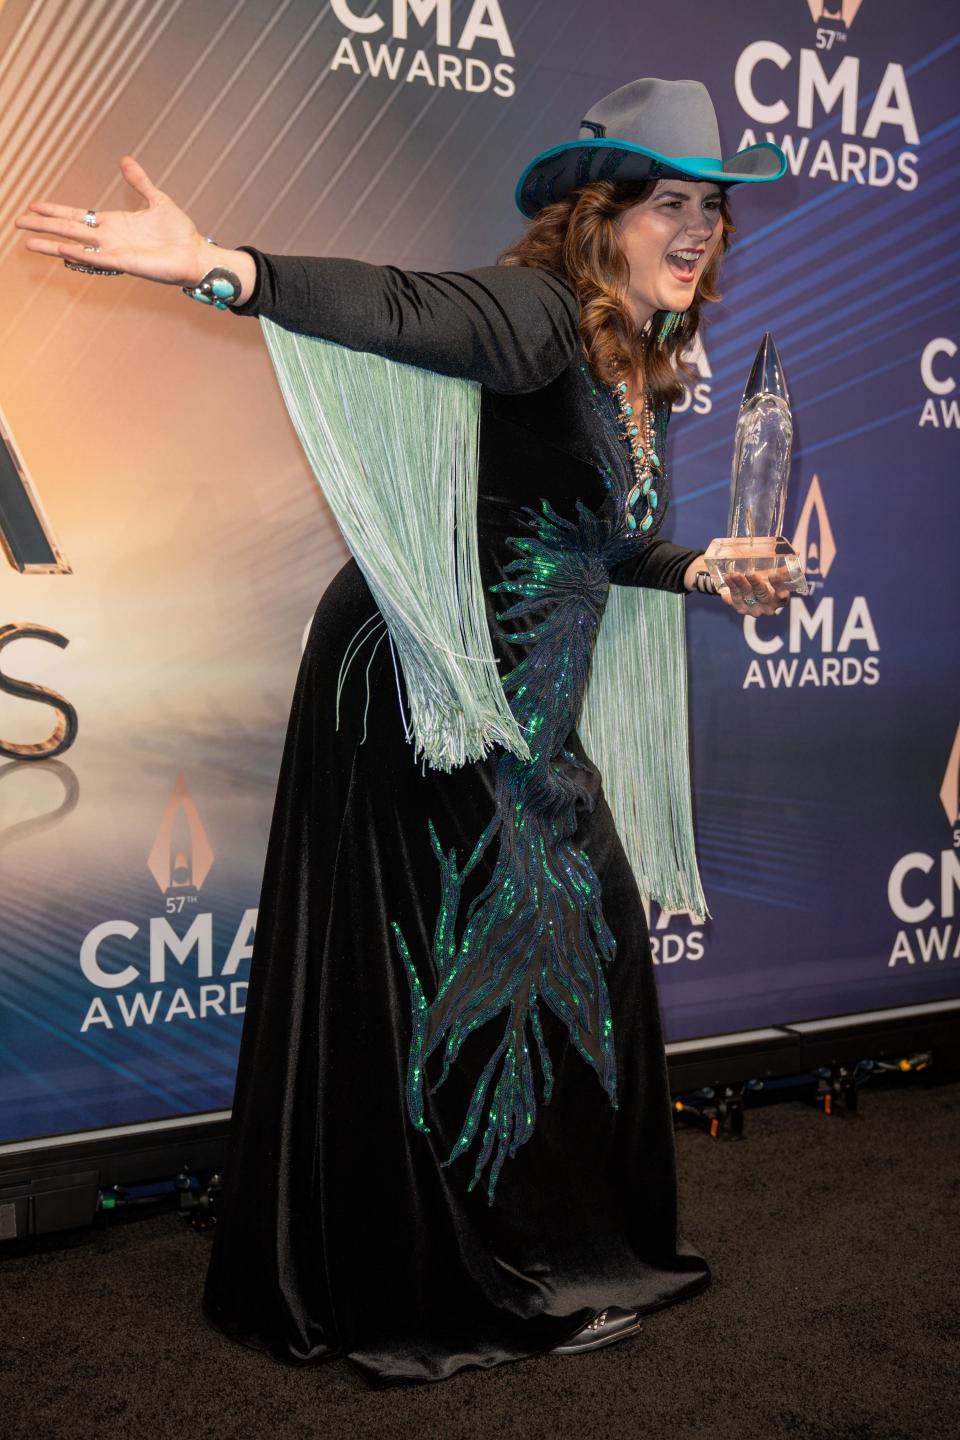 Jenee Fleenor celebrates with her Musician of the Year award in the backstage media center.